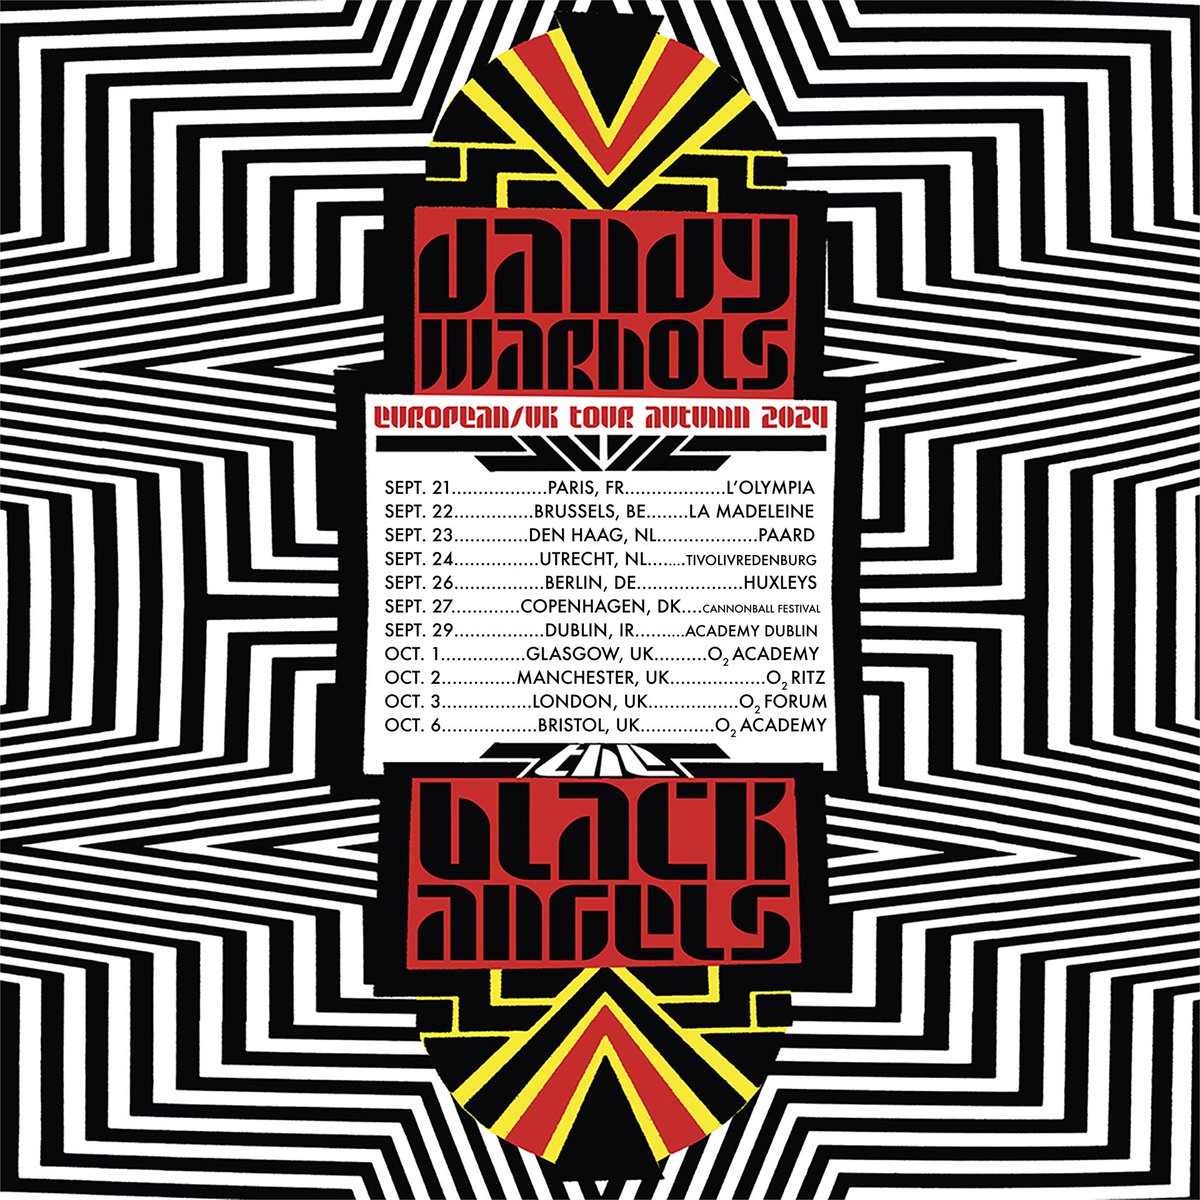 🇪🇺🇬🇧The Dandy Warhols + @TheBlackAngels LIVE in Europe/UK this autumn! 🎟️bit.ly/TDW-Shows